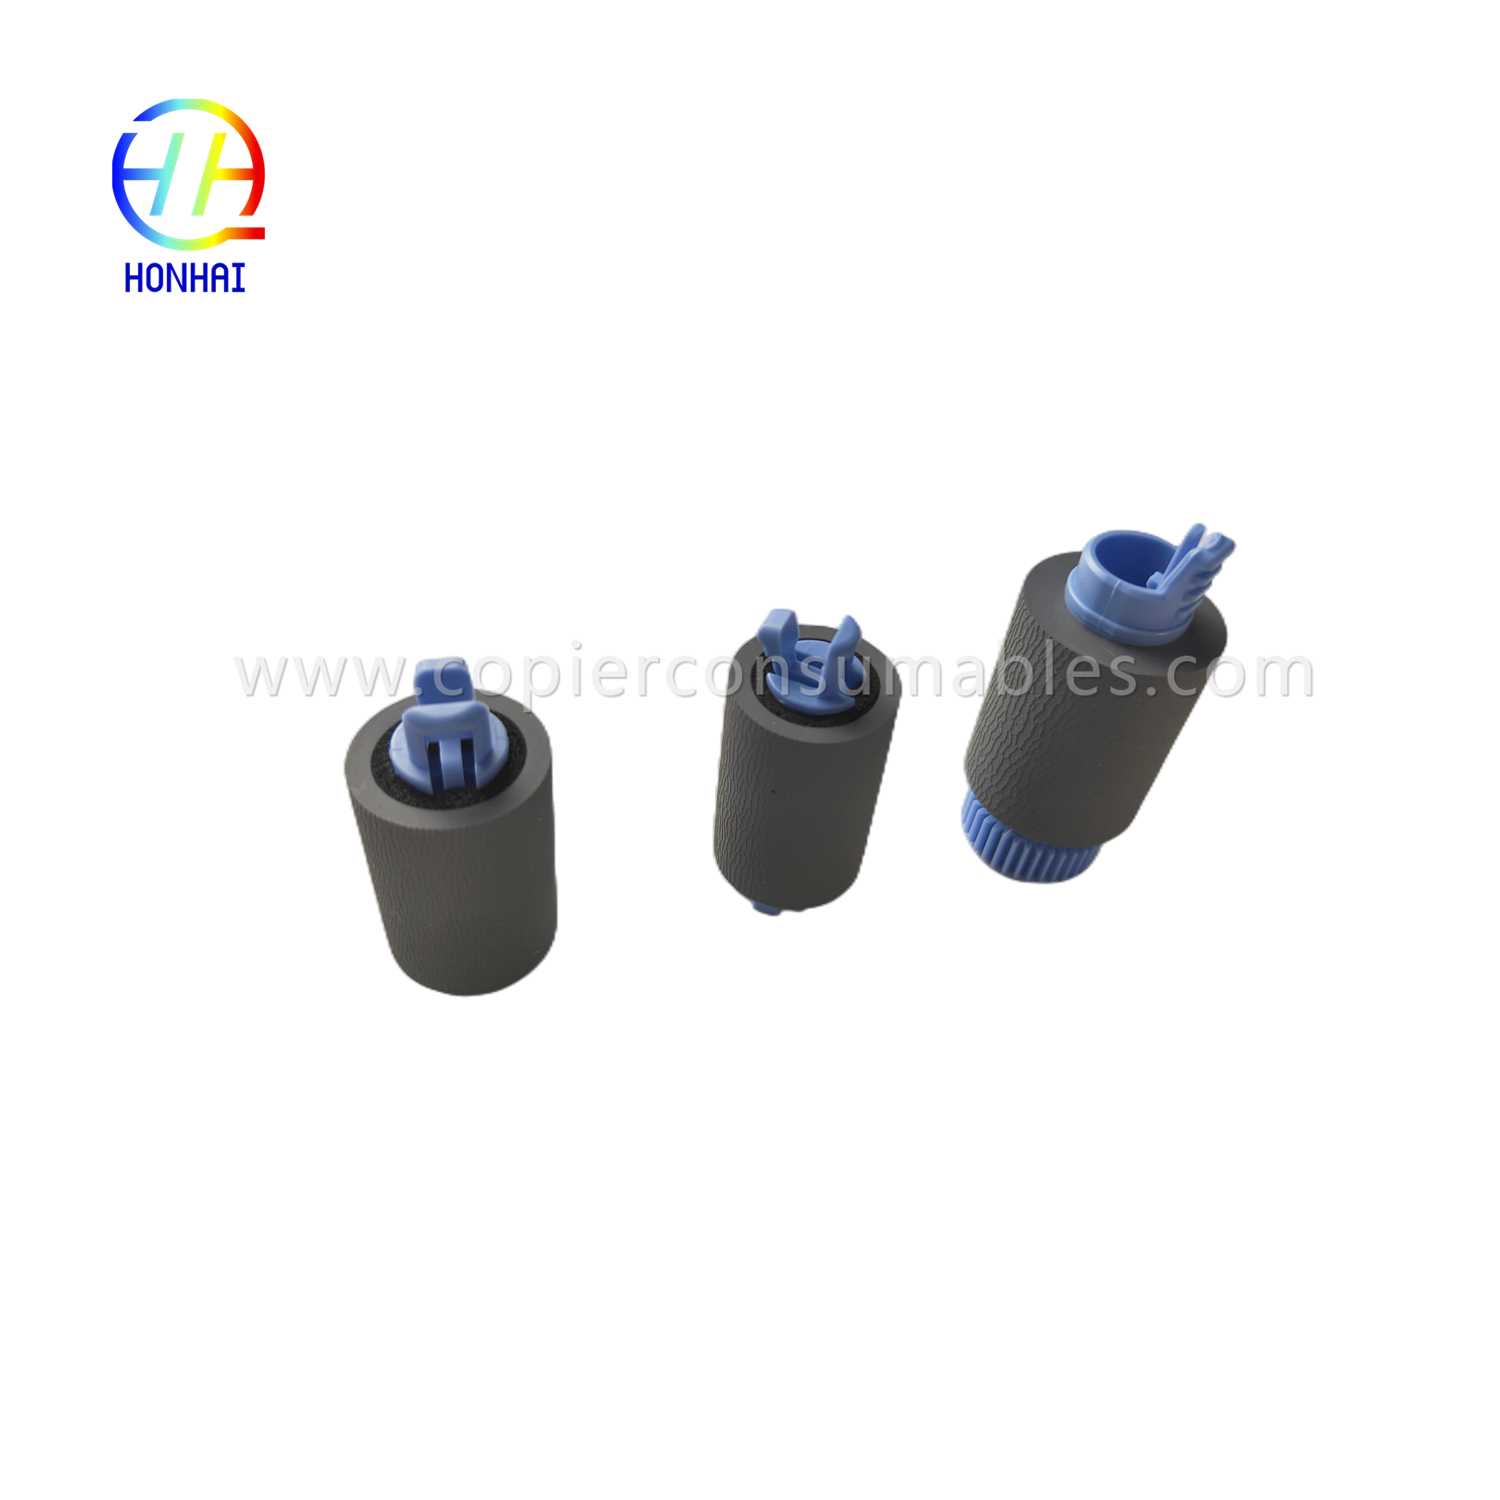 https://www.copierconsumables.com/tray-2-5-pickup-feed-separation-roller-set-for-hp-a7w93-67082-mfp-785f-780dn-e77650z-e77660z-e77650dn-e77660dn-p77740dn- p77750z-p77760z-p75050dn-p75050dw-proizvod/